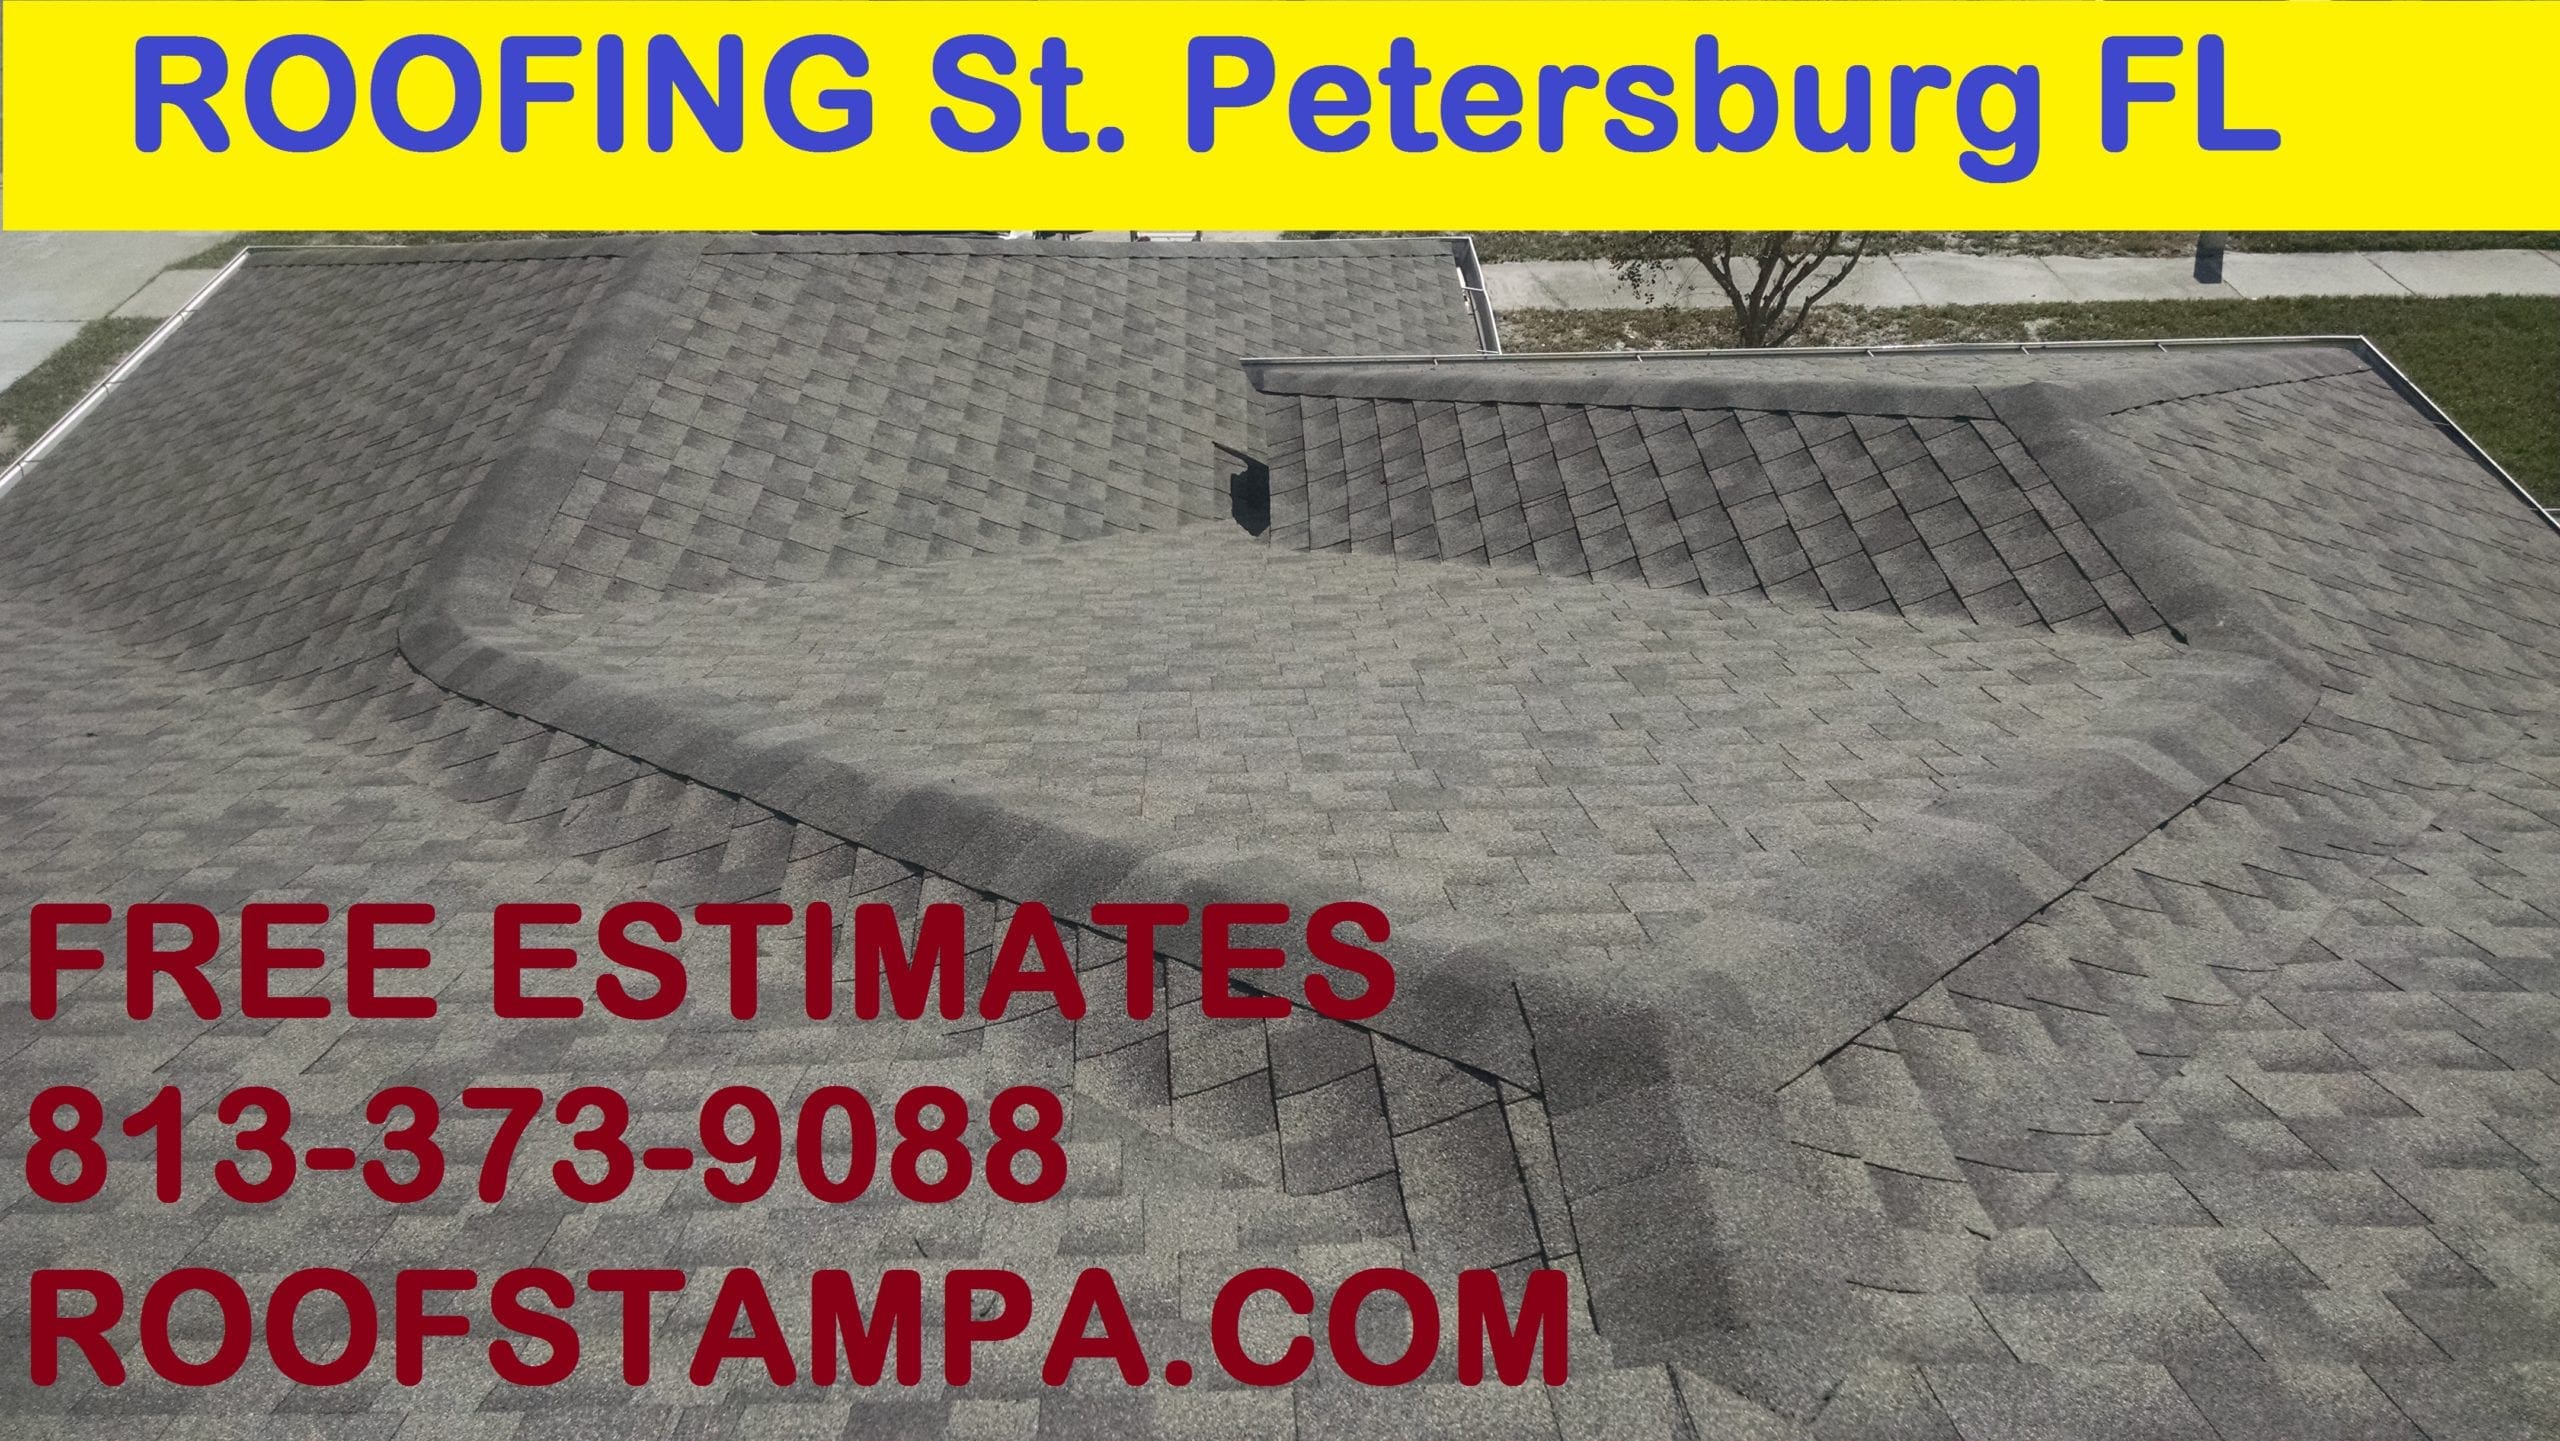 Roofing St. Petersburg Florida Code Engineered Systems